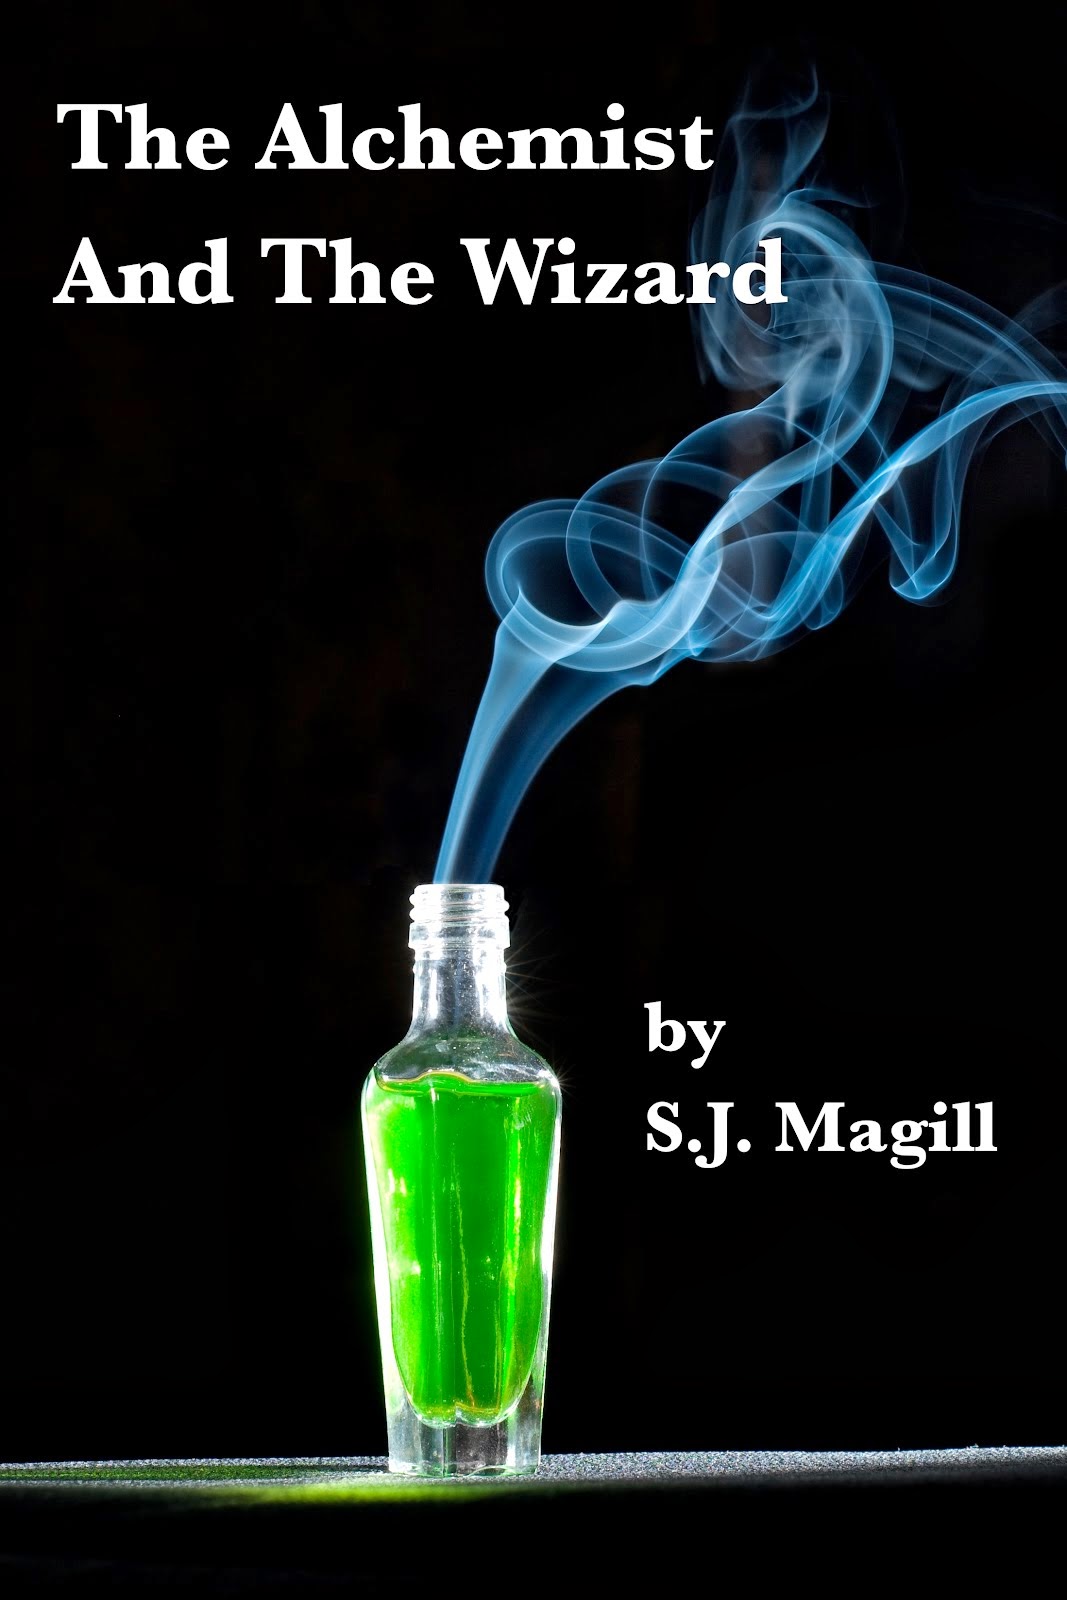 The Alchemist and the Wizard (Link to Amazon.com)